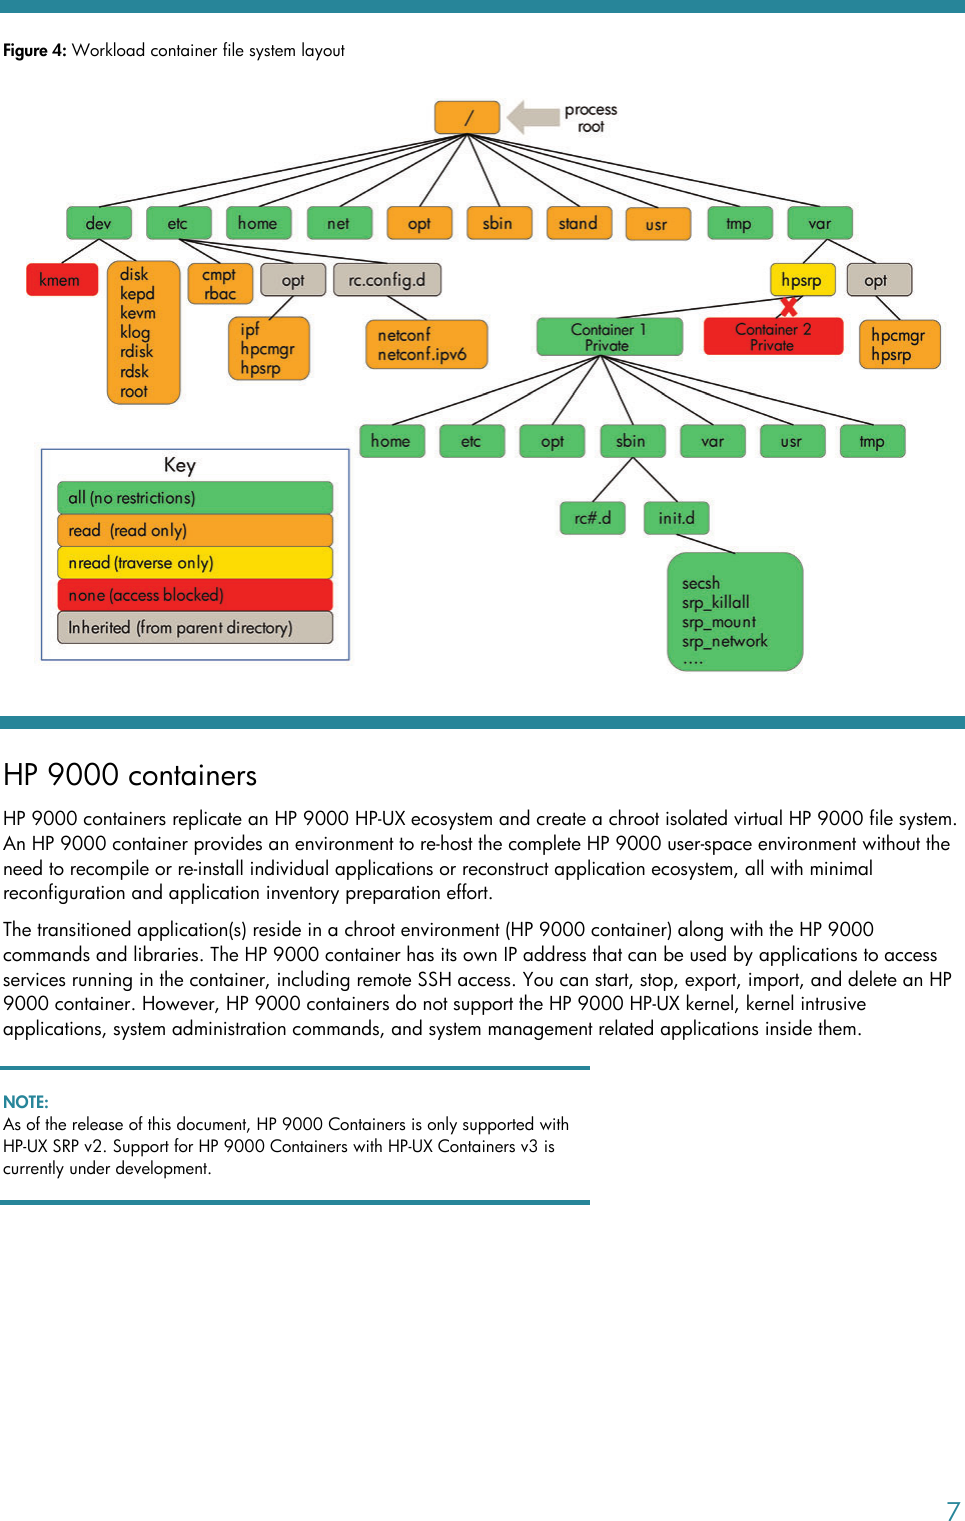 Page 7 of 11 - Hp Hp-Hp-Ux-Containers-Srp-White-Paper- HP-UX Containers Technical White Paper - (US English)  Hp-hp-ux-containers-srp-white-paper